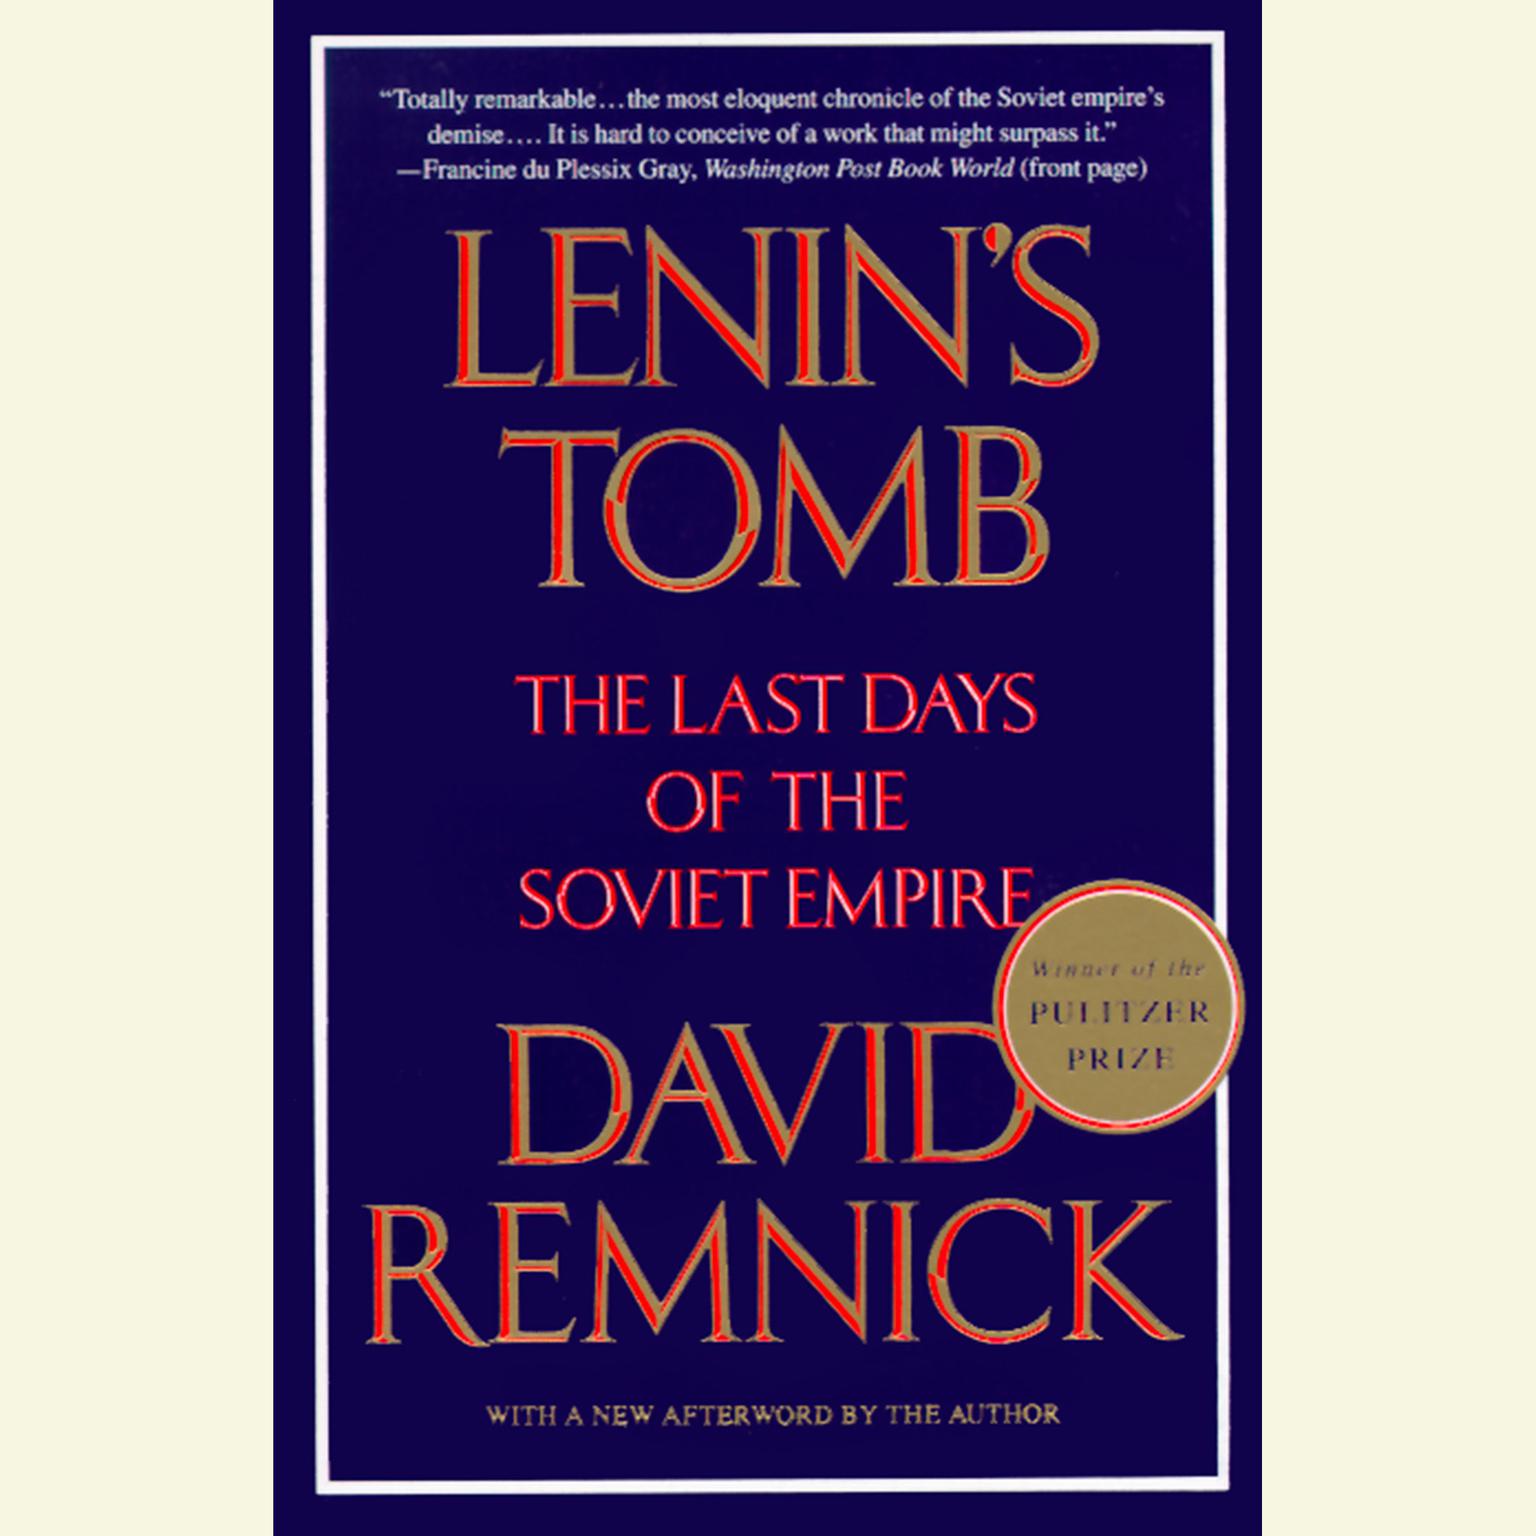 Lenins Tomb: The Last Days of the Soviet Empire (Pulitzer Prize Winner) Audiobook, by David Remnick